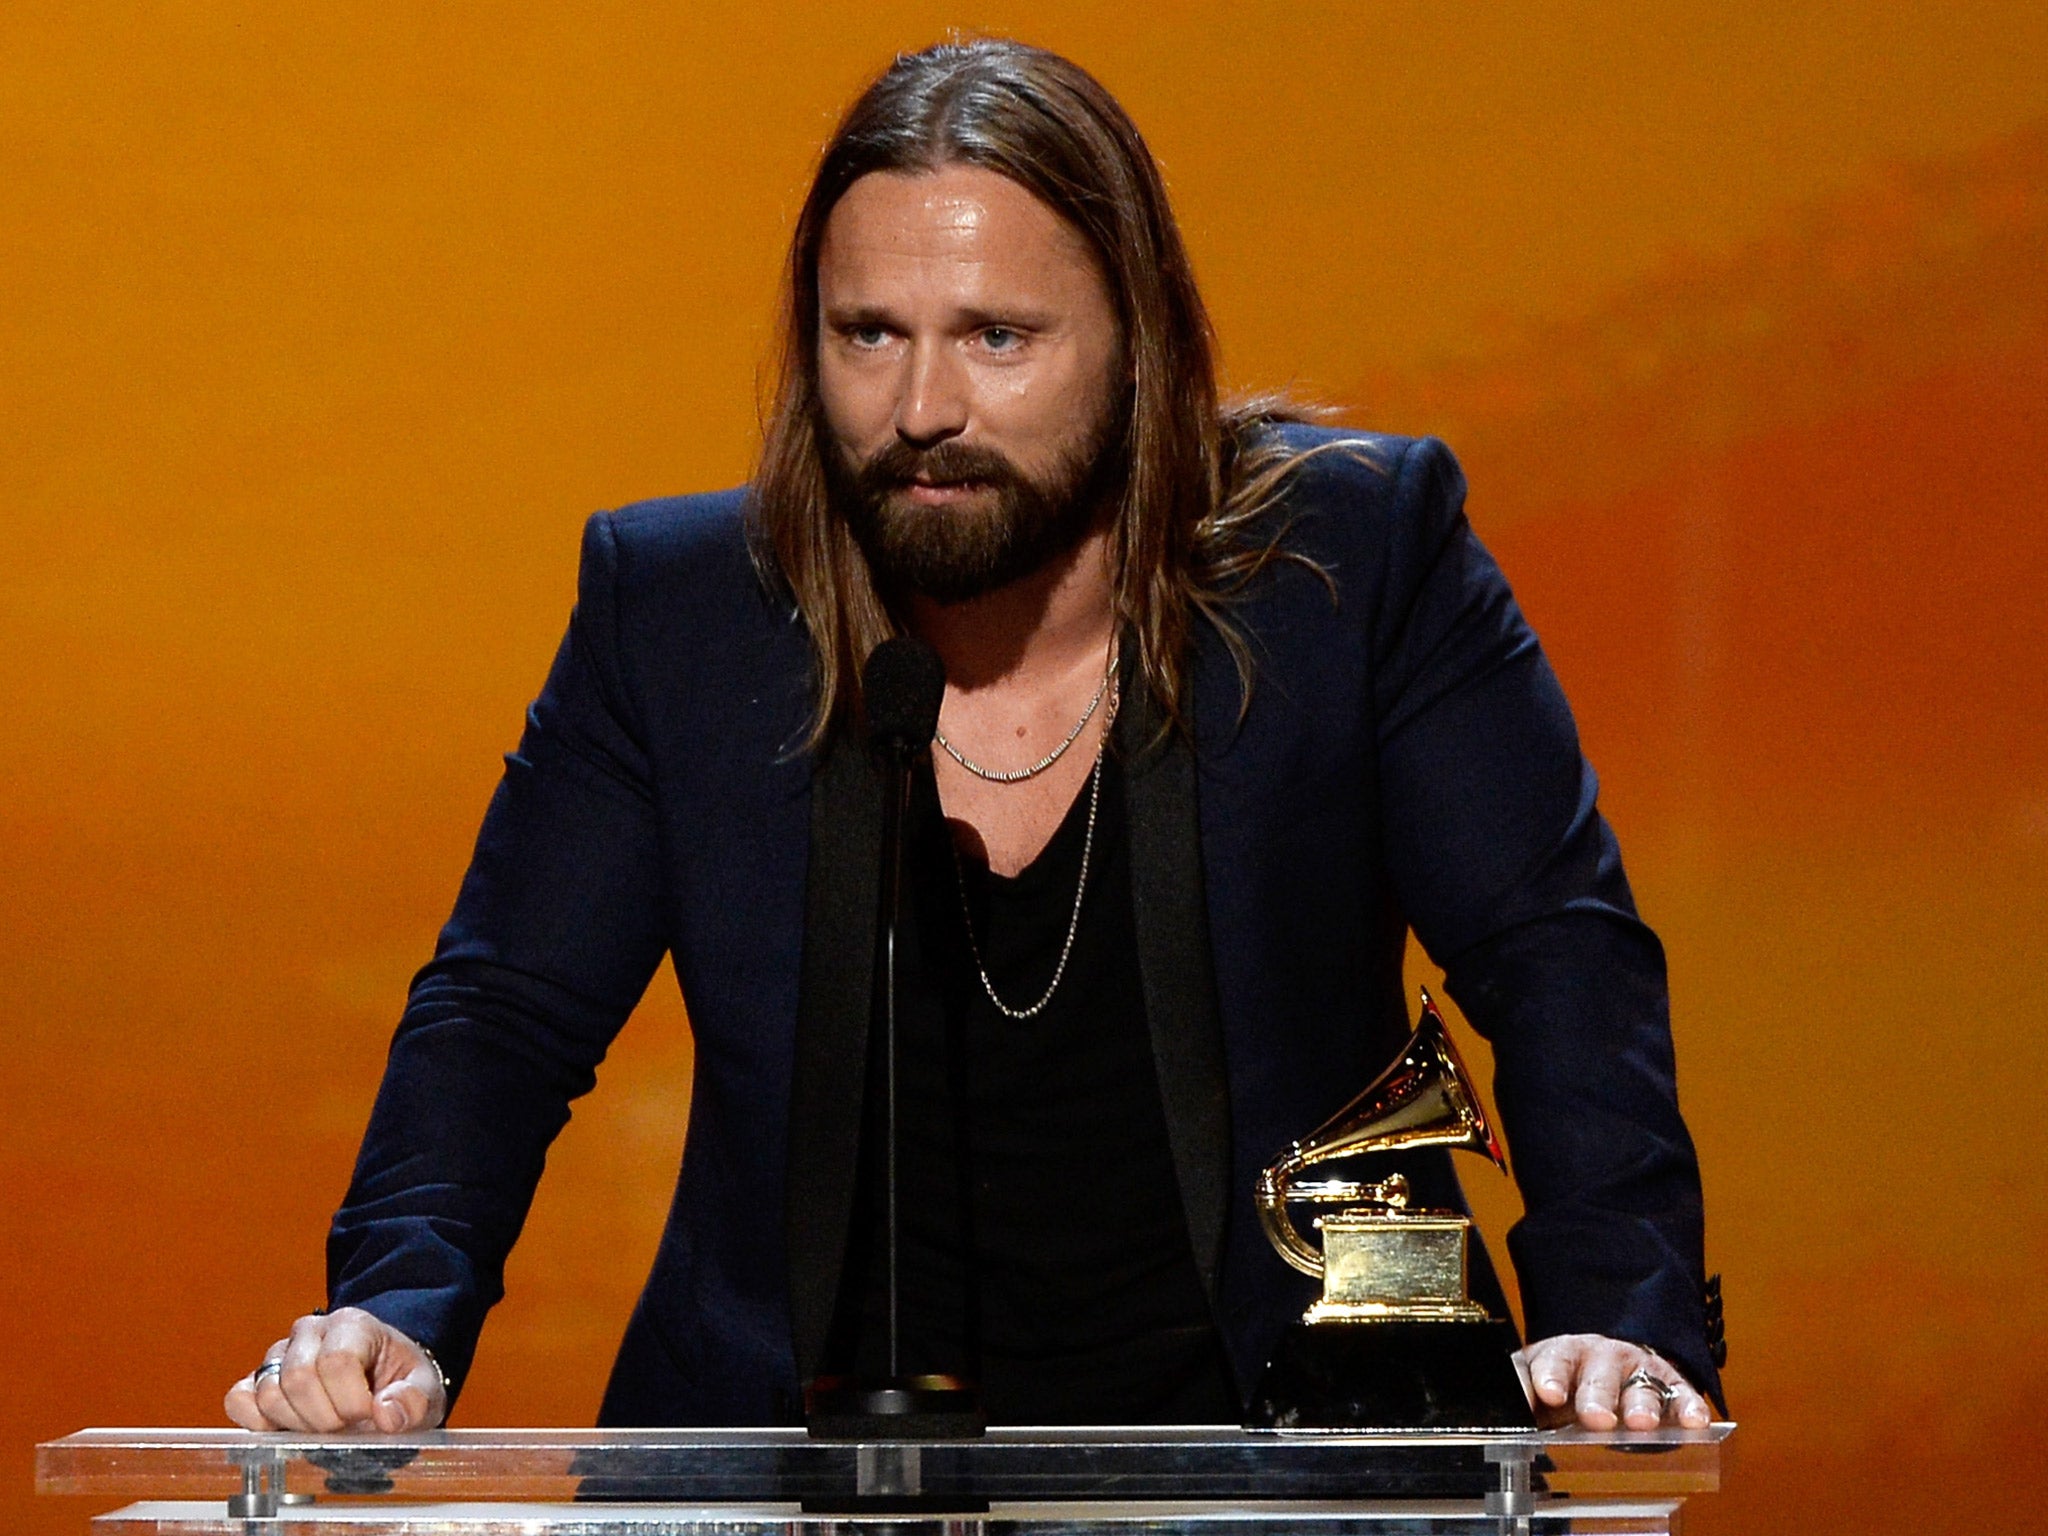 Last year Max Martin produced and co-wrote for - among others - Taylor Swift and Katy Perry